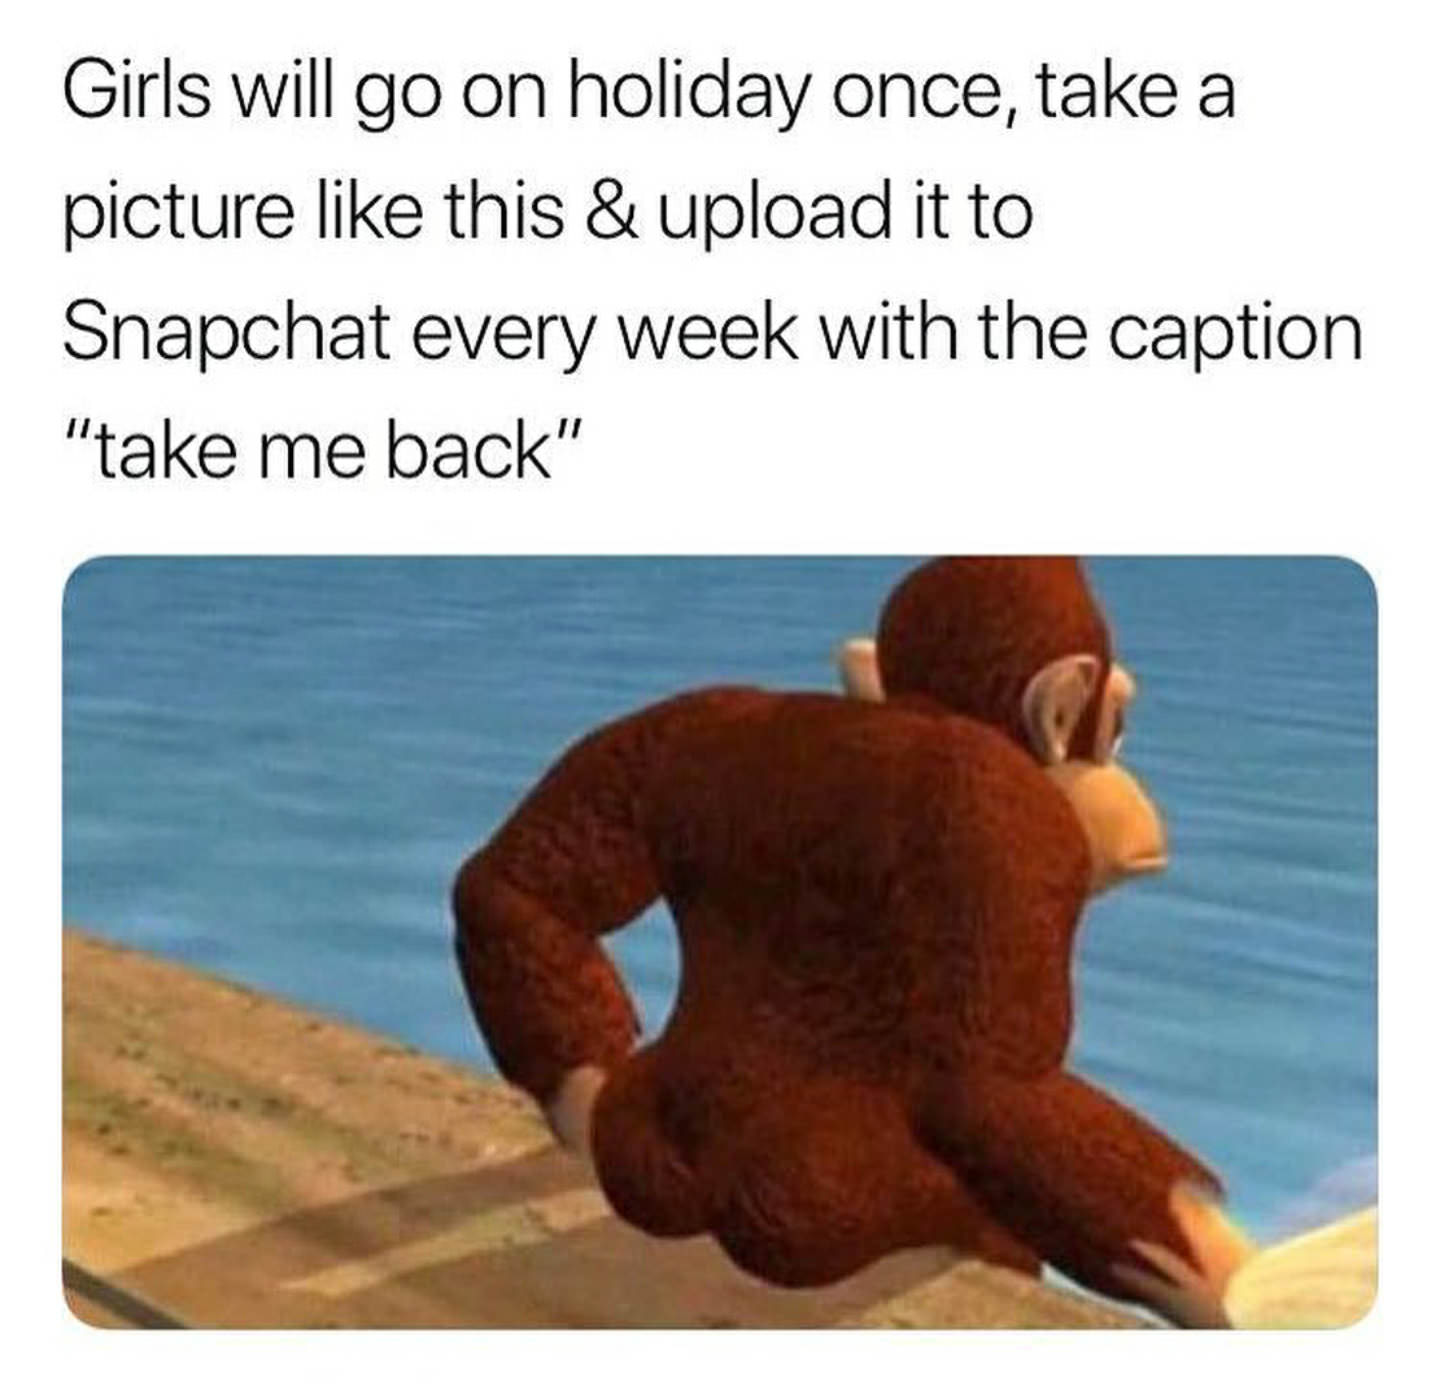 take me back meme - Girls will go on holiday once, take a picture this & upload it to Snapchat every week with the caption "take me back"